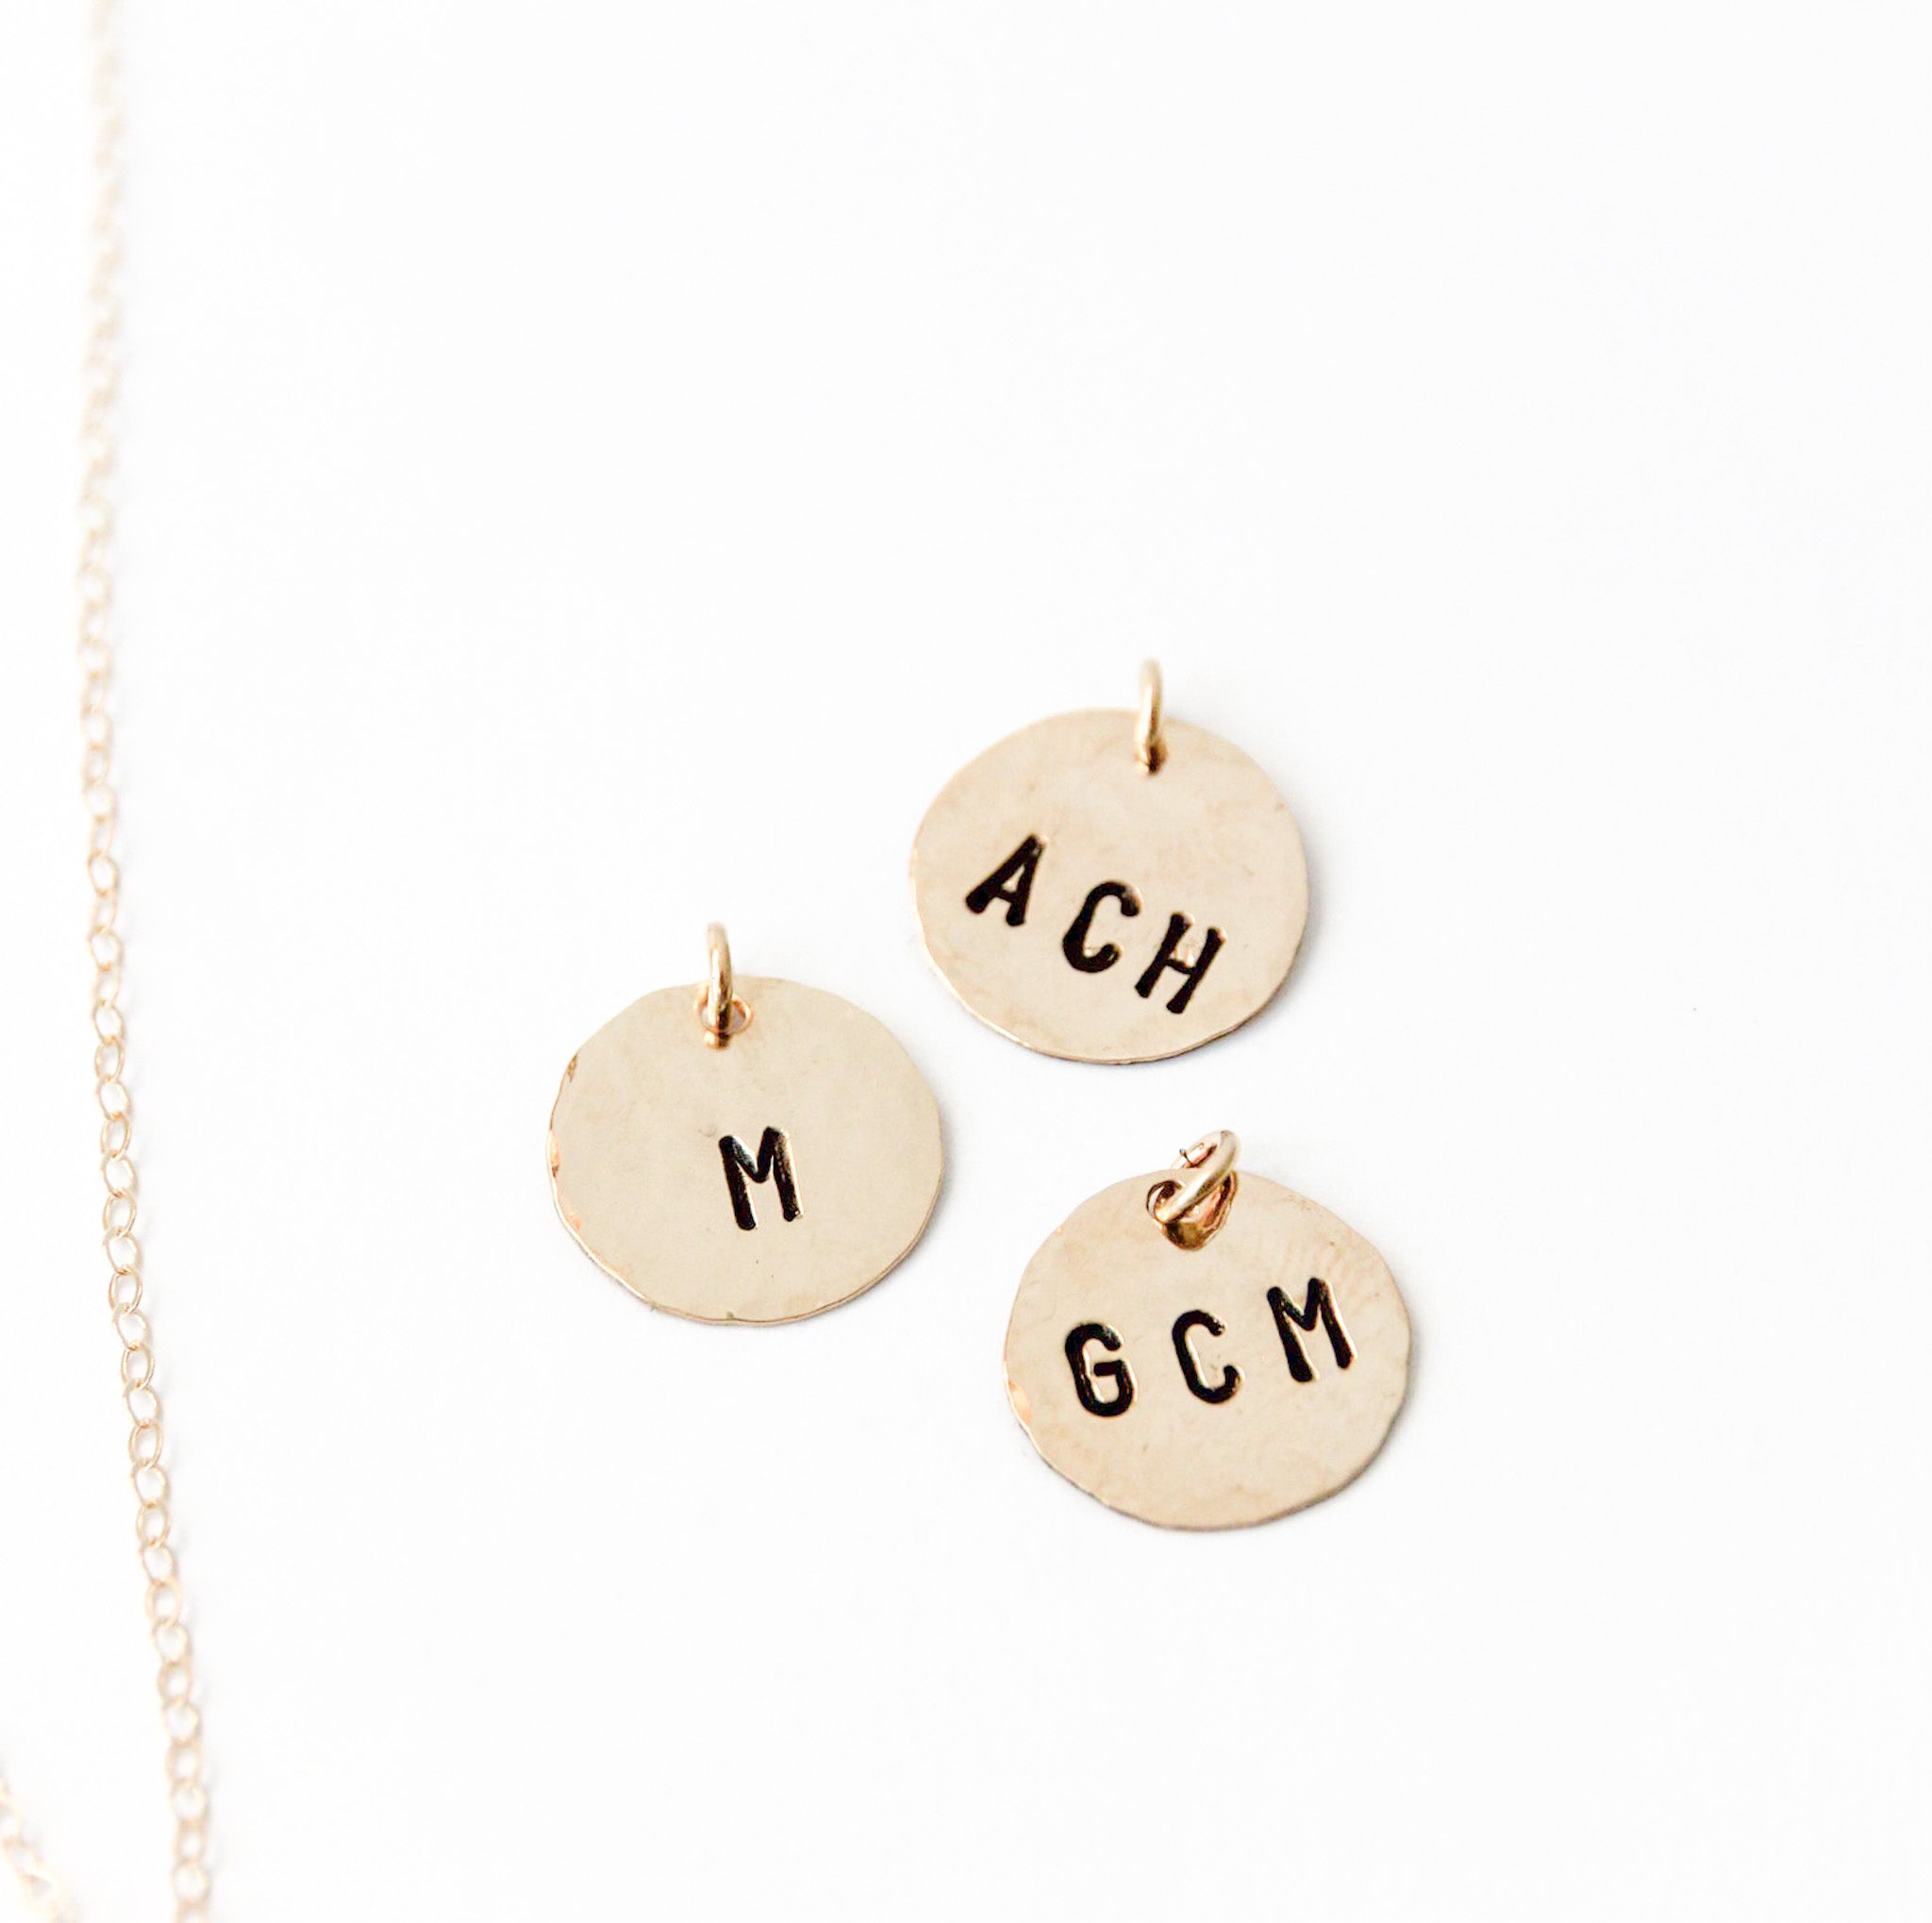 Additional Hand-Stamped Initial Charm